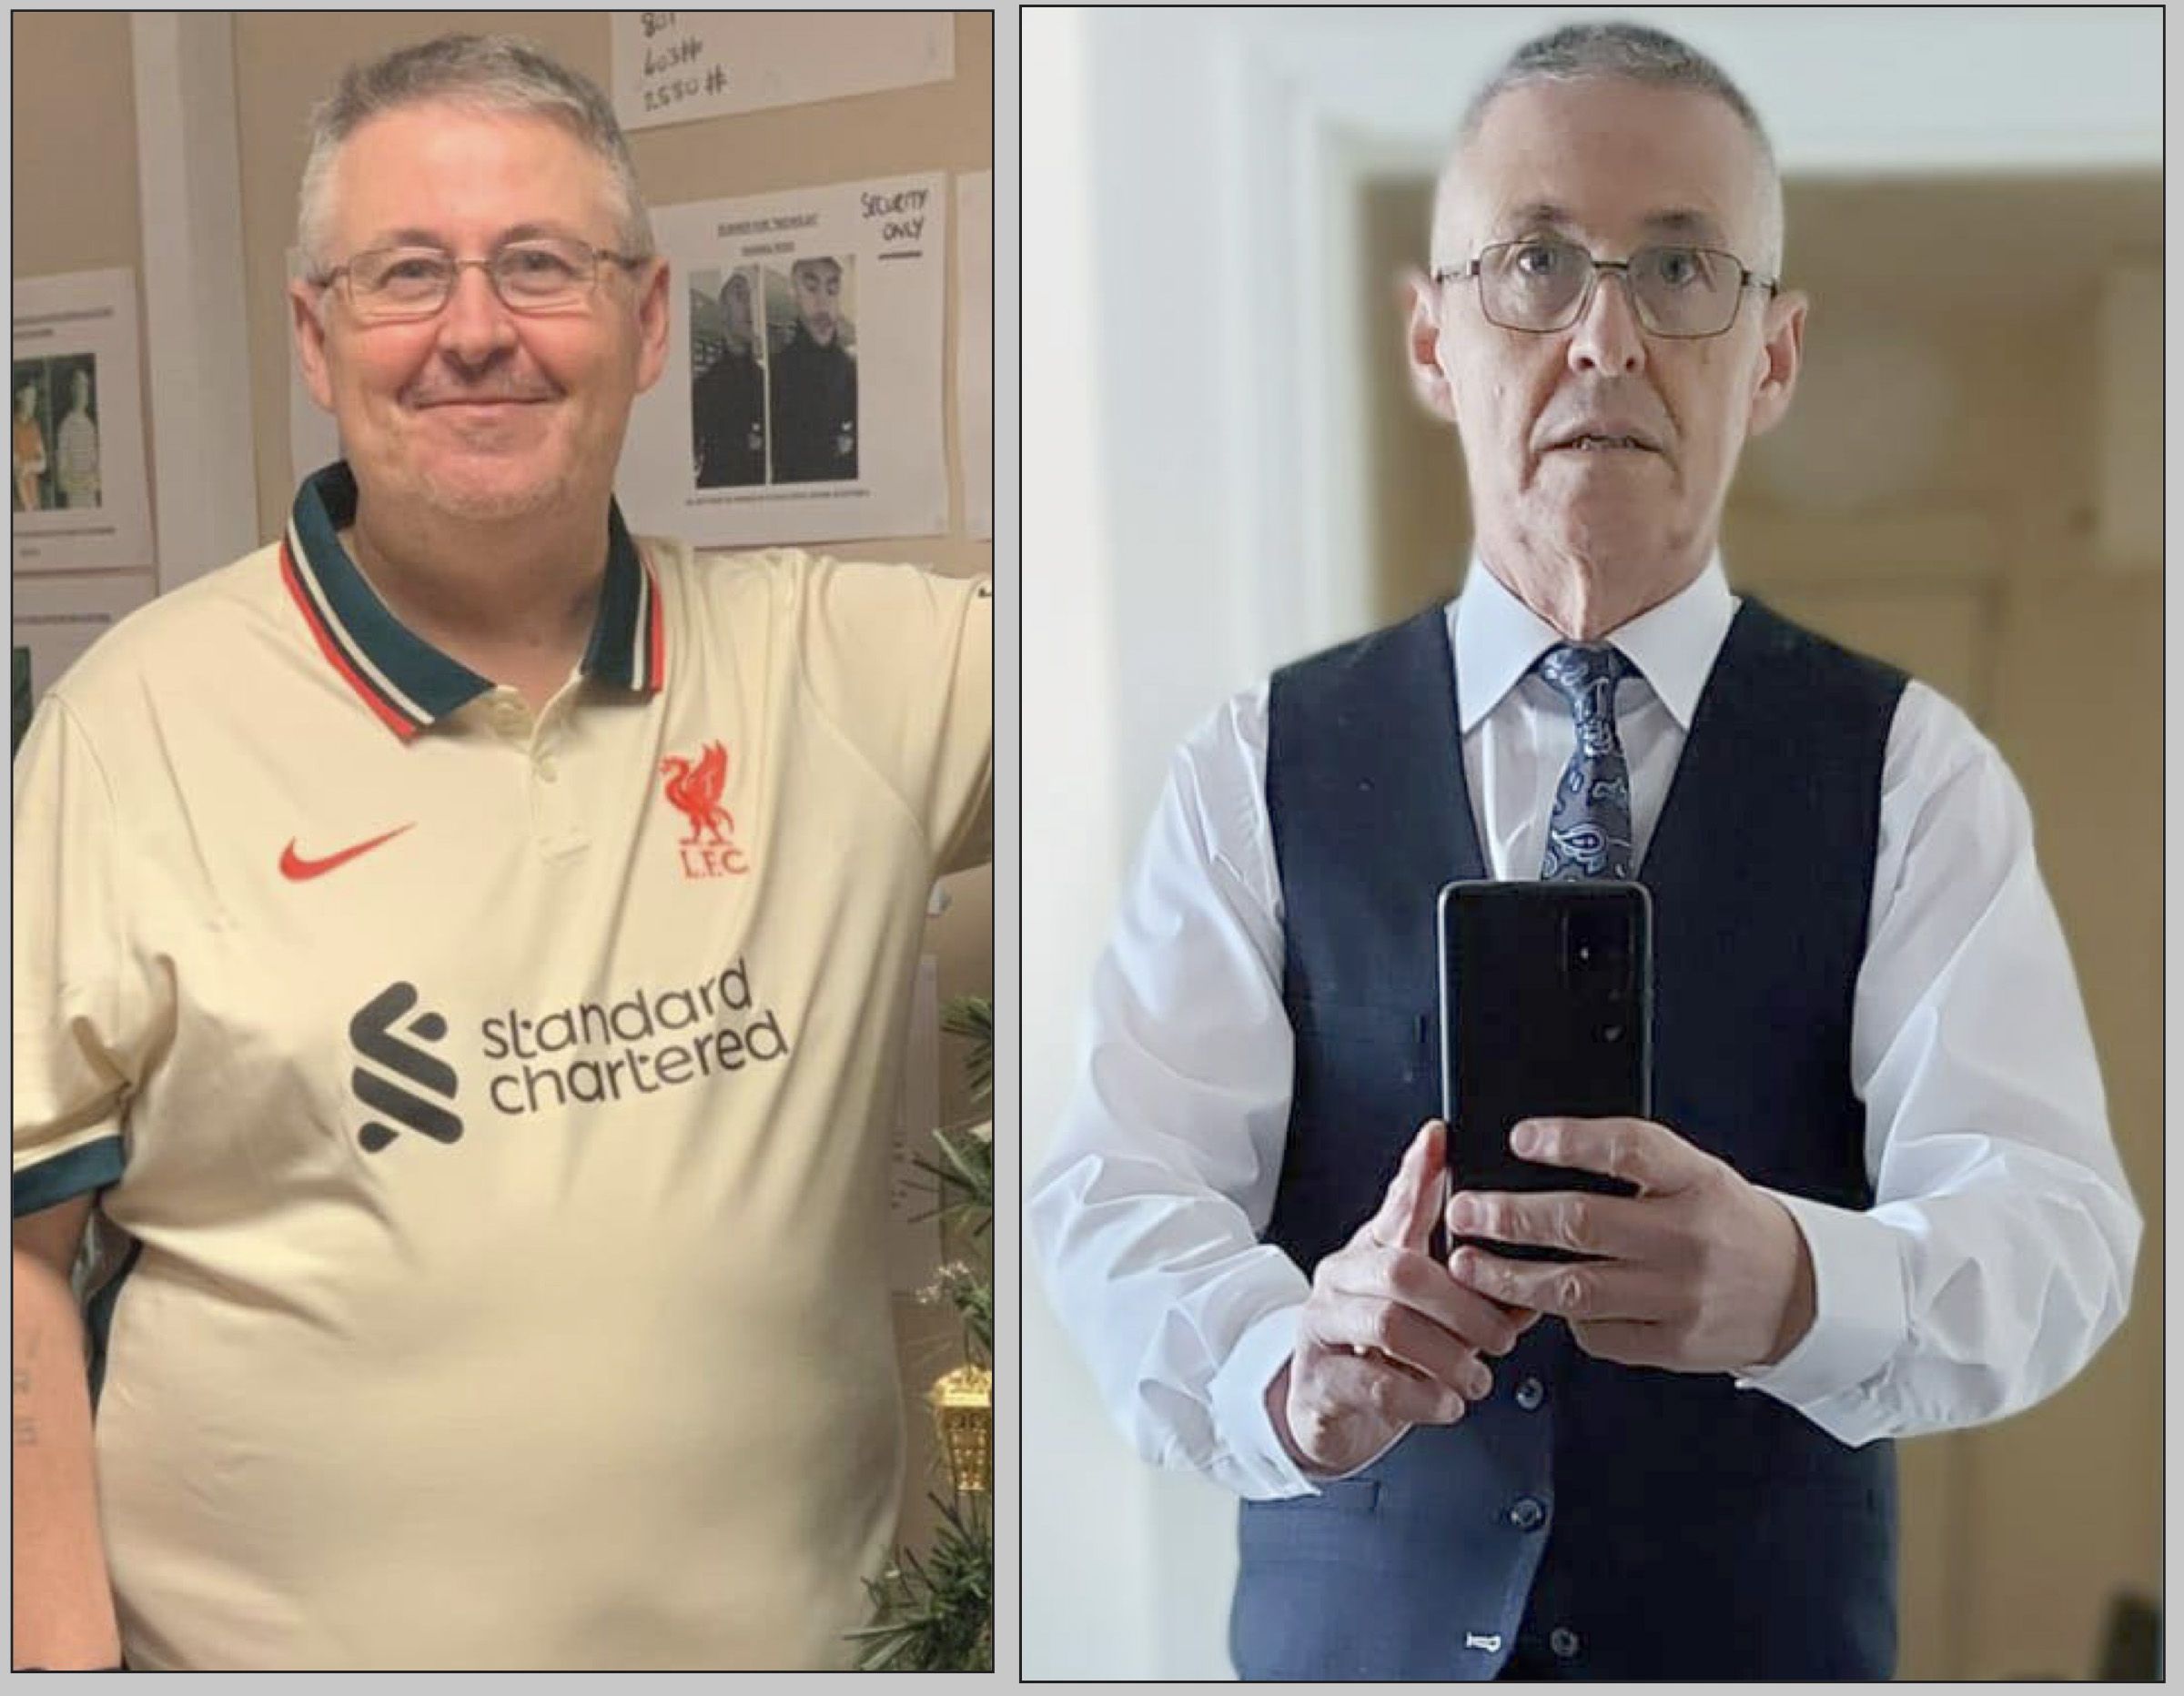 CHANGE: Desmond, before and after joining Slimming World 